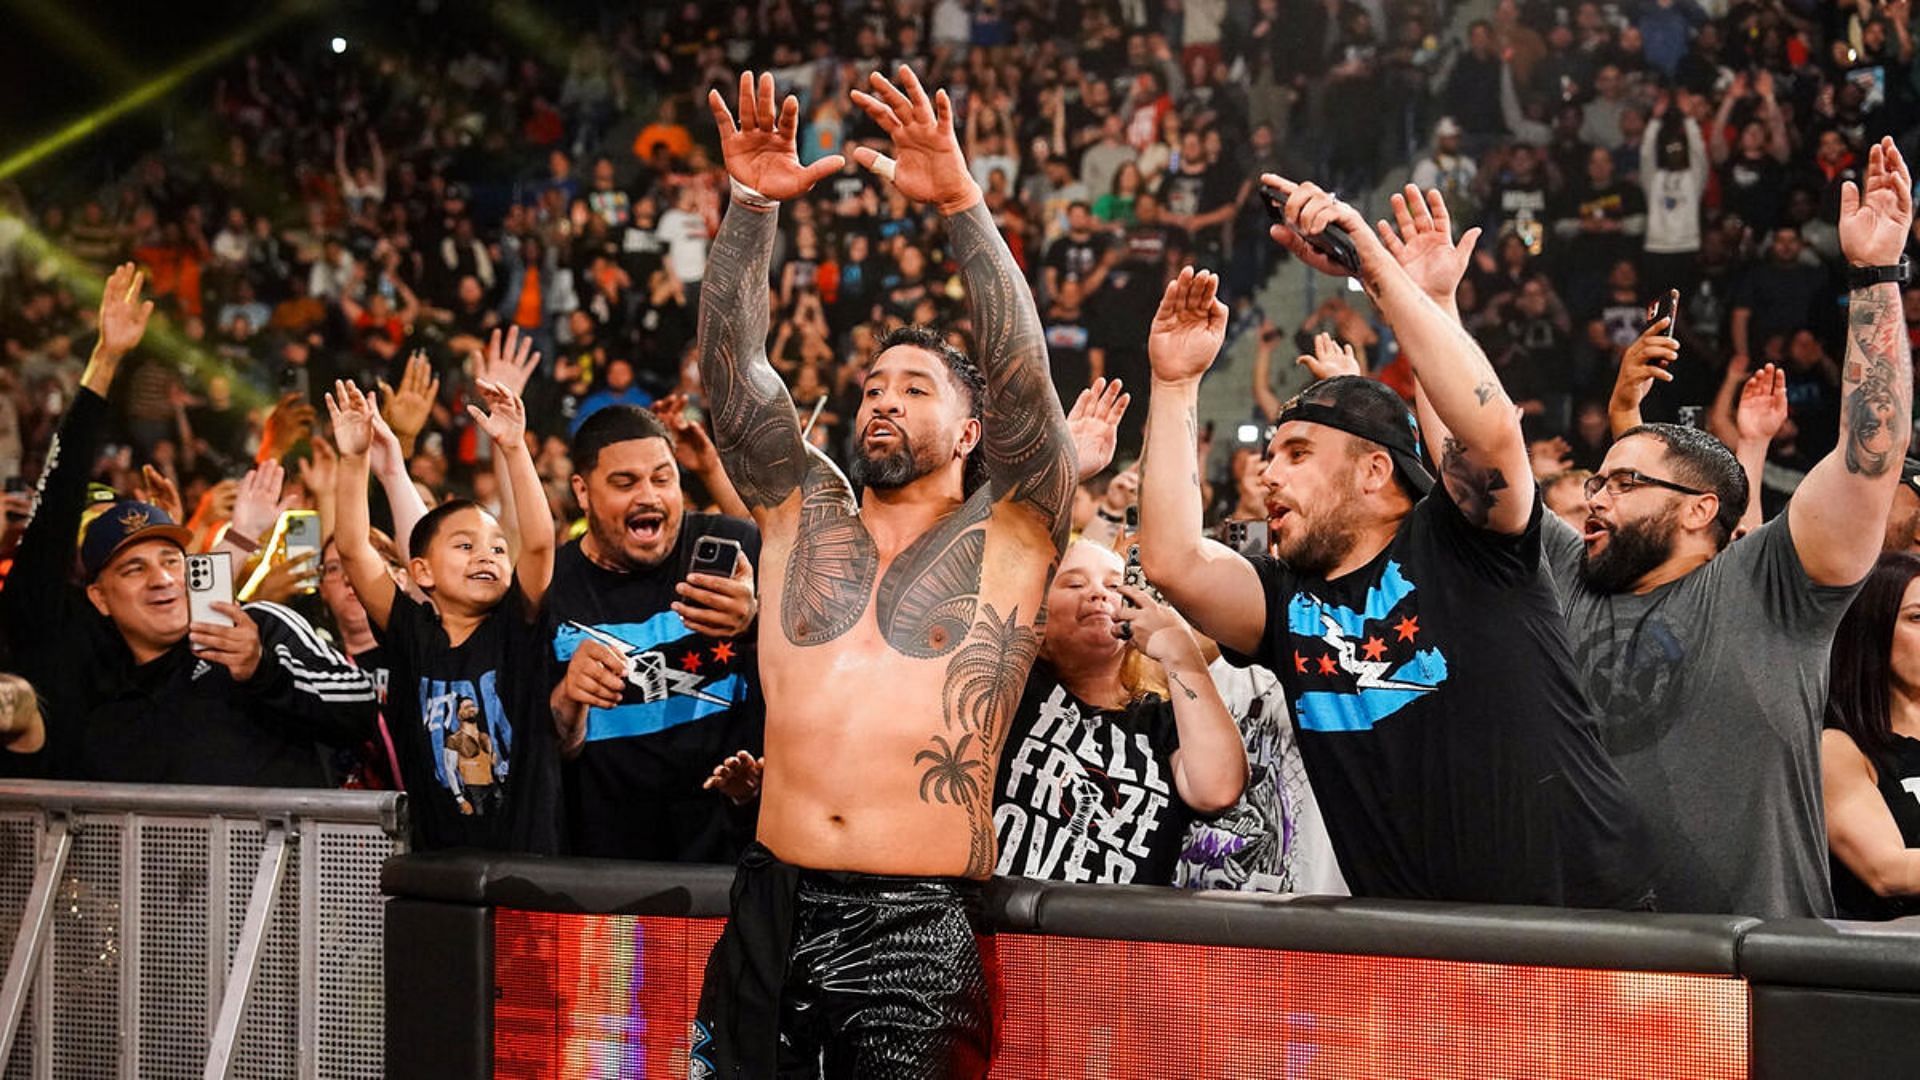 Will Jey Uso lose the King of the Ring tournament?